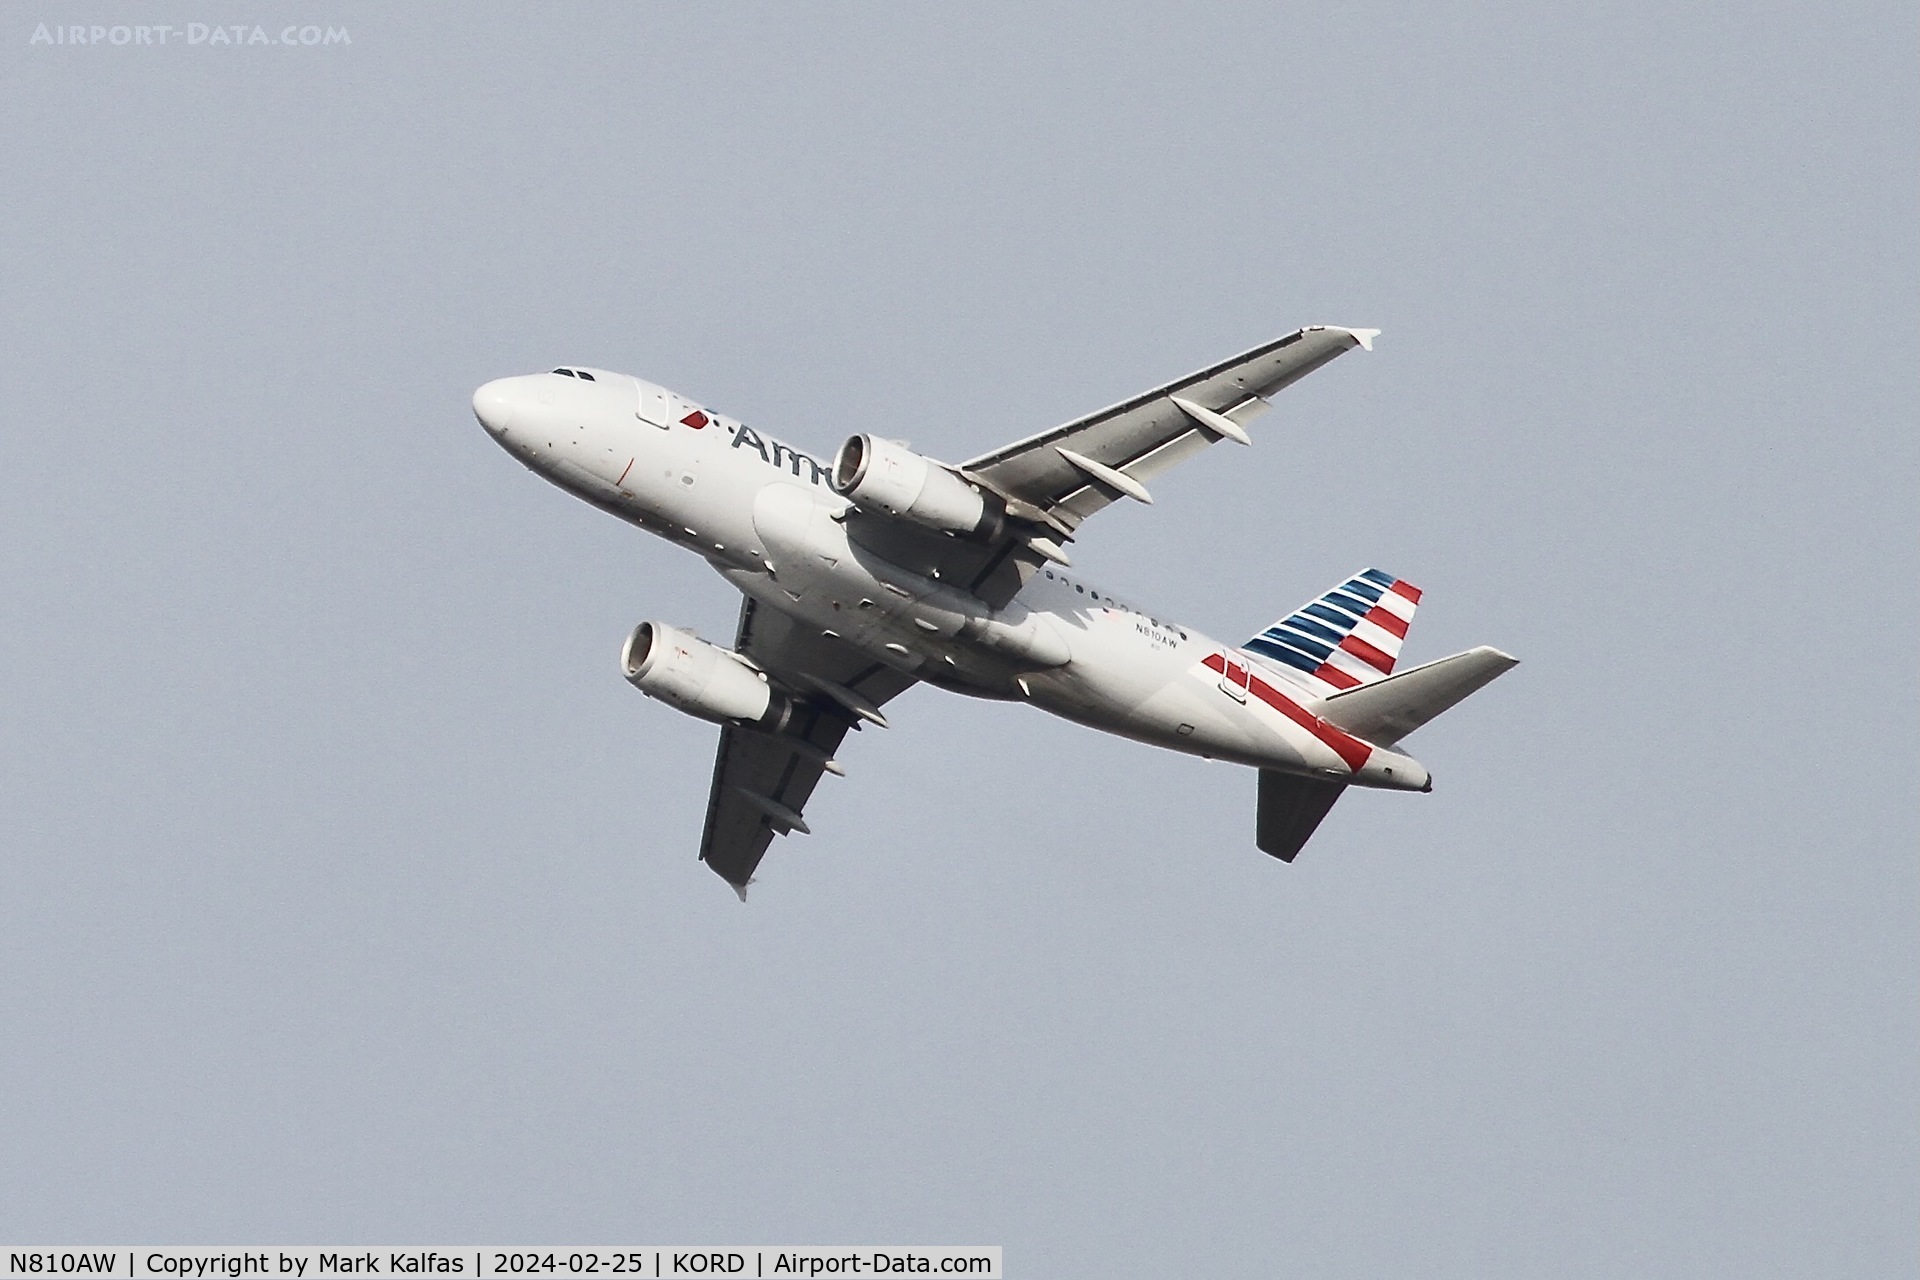 N810AW, 1999 Airbus A319-132 C/N 1116, A319 American Airlines AIRBUS INDUSTRIE A319-112 N810AW AAL2043 ORD-LGA